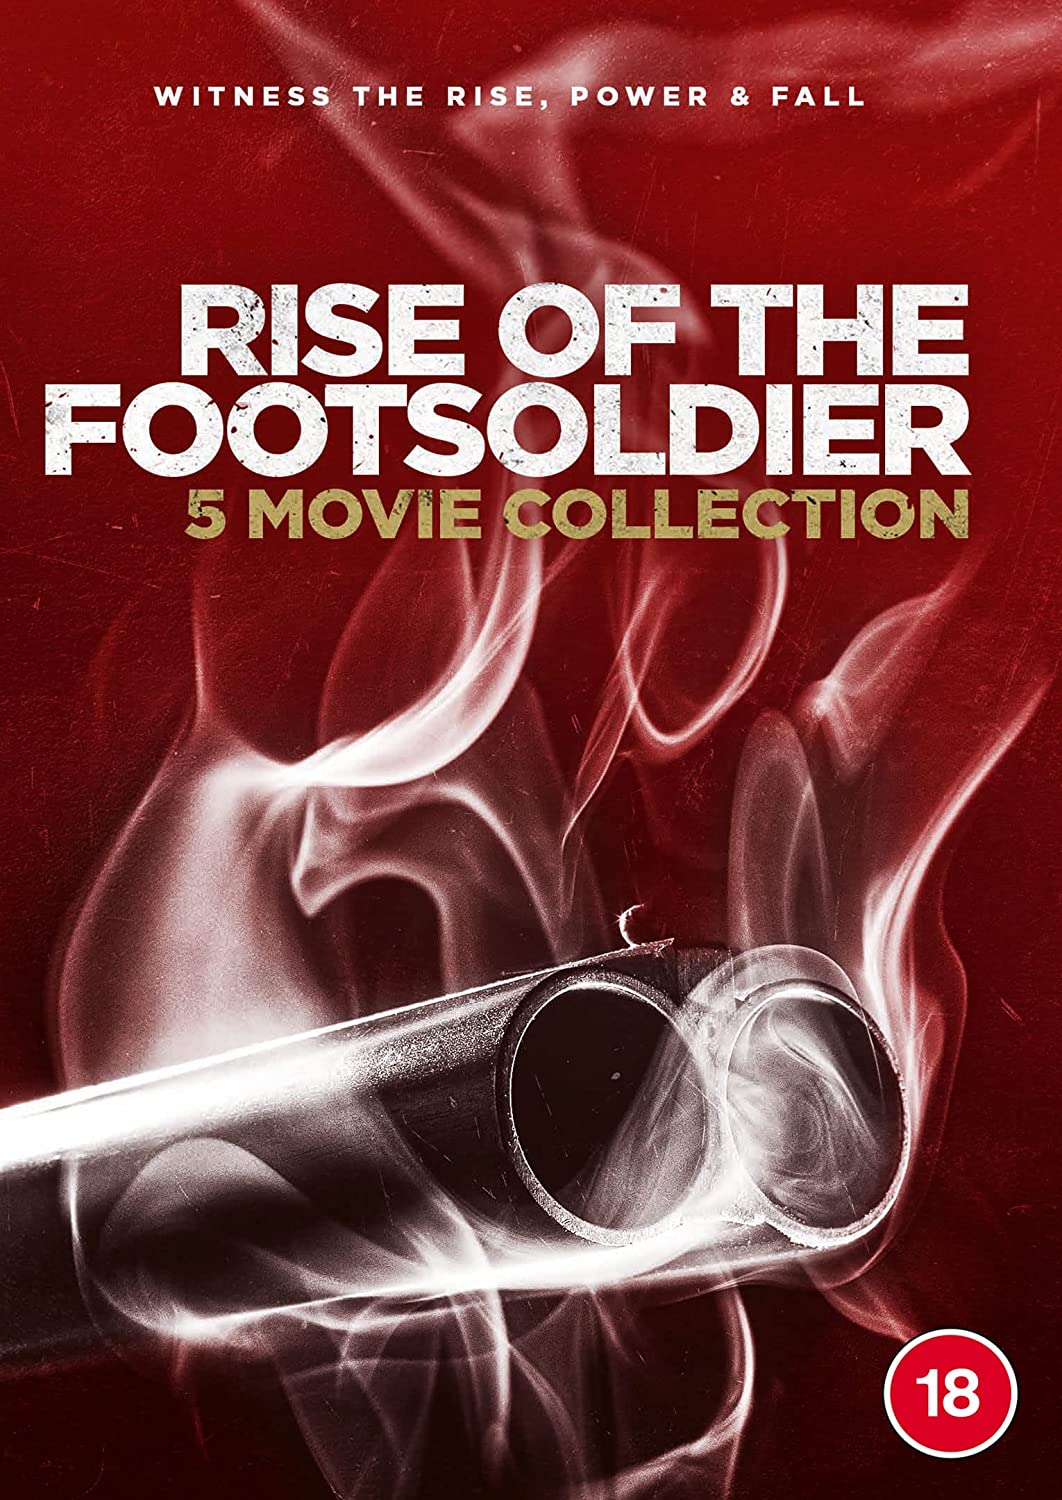 Rise of the Footsoldier Boxset 1-5 [2021] - Crime/Drama [DVD]